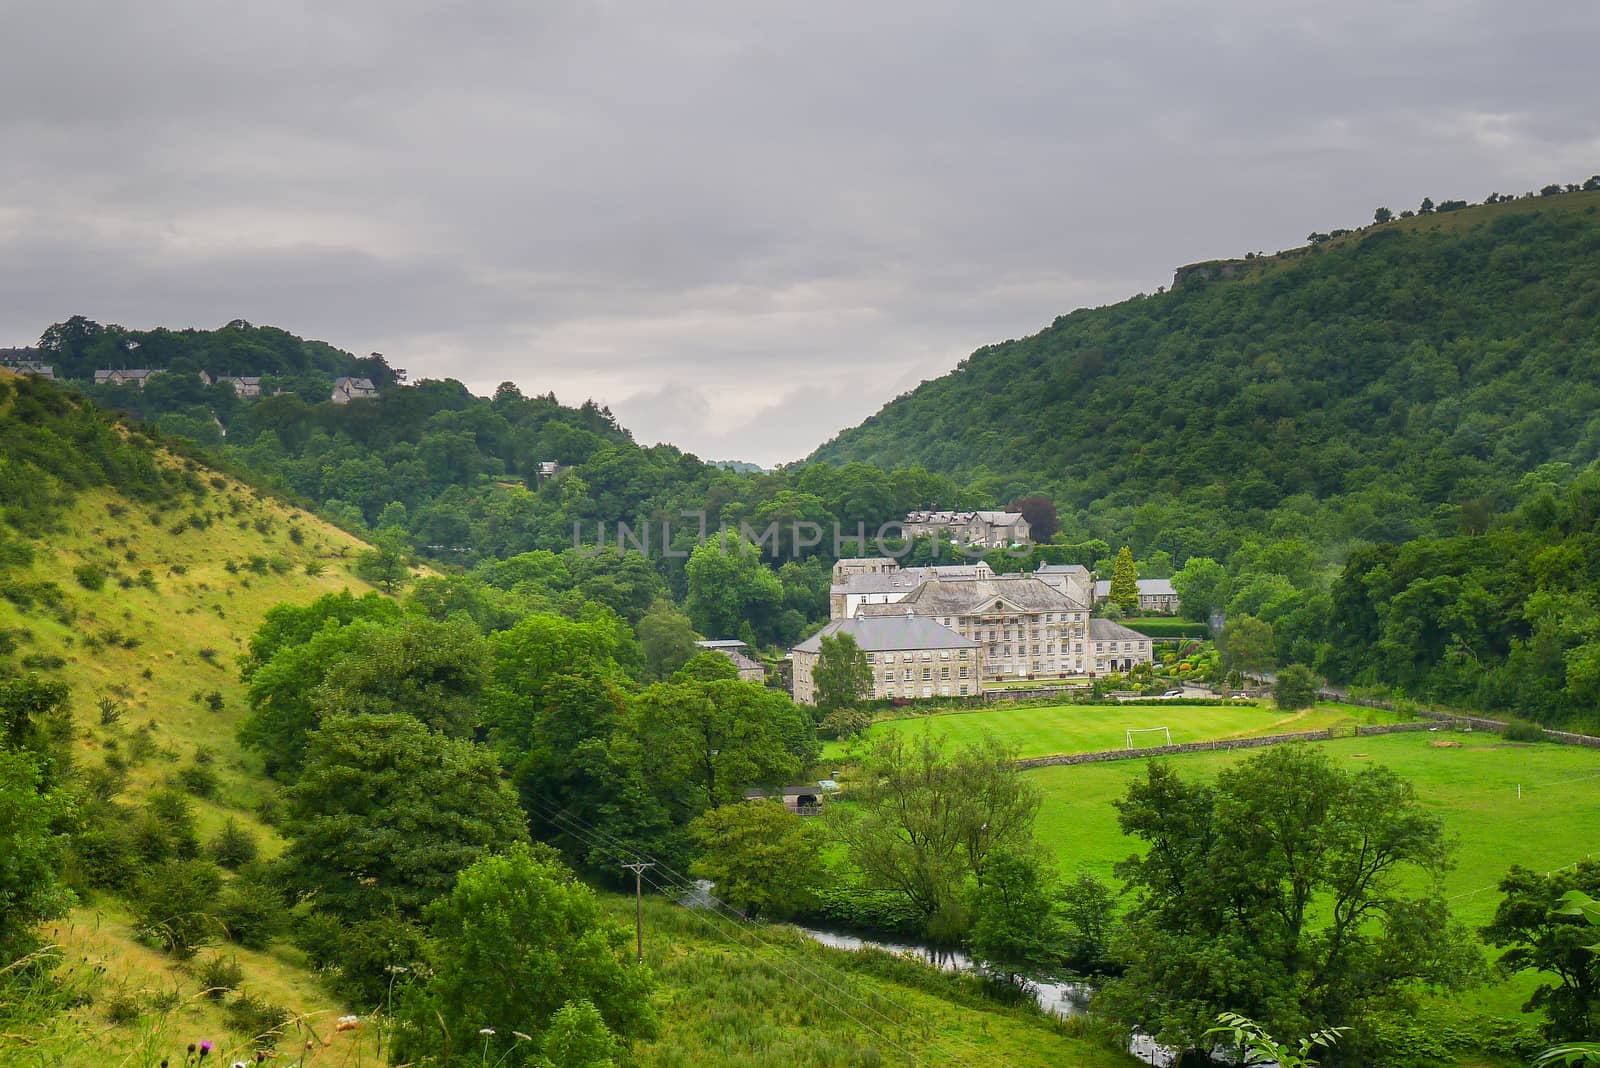 Cressbrook Mill as viewed from the Monsal Trail by chrisukphoto